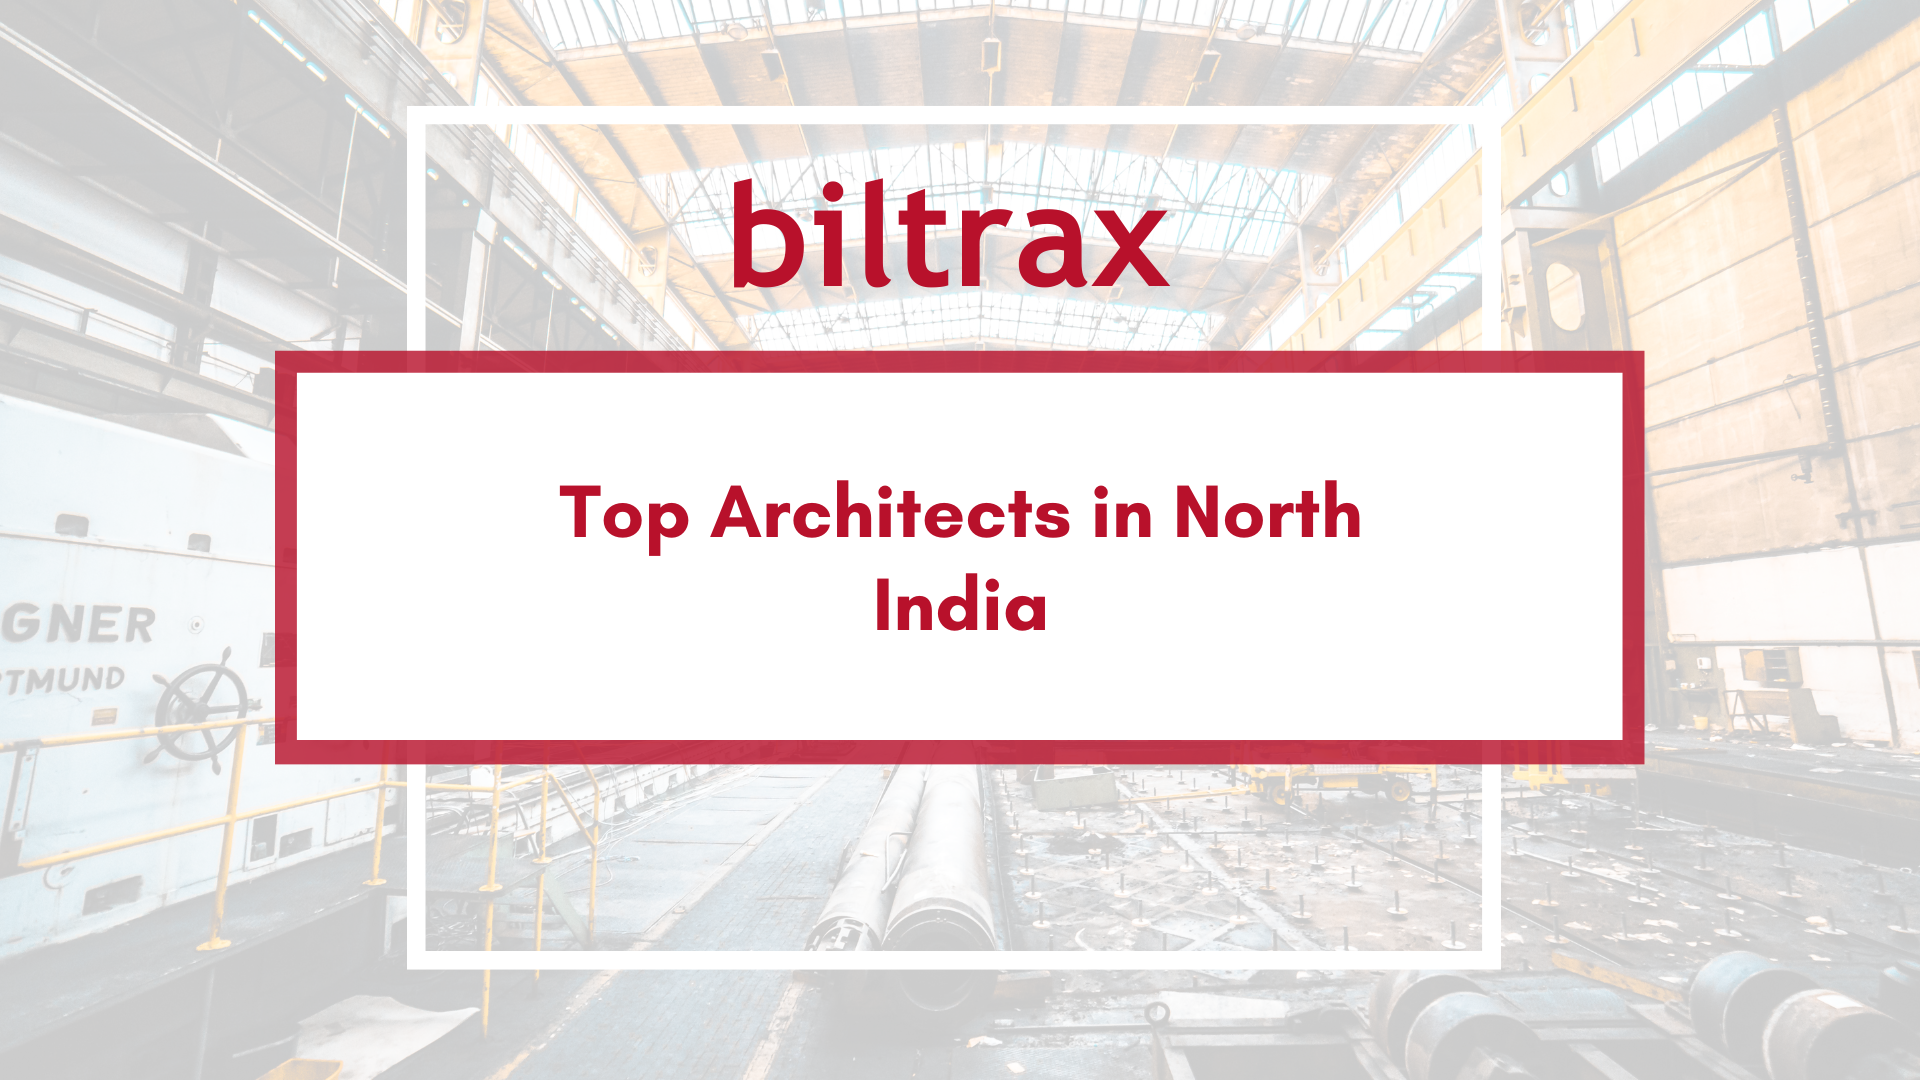 Top architects in India